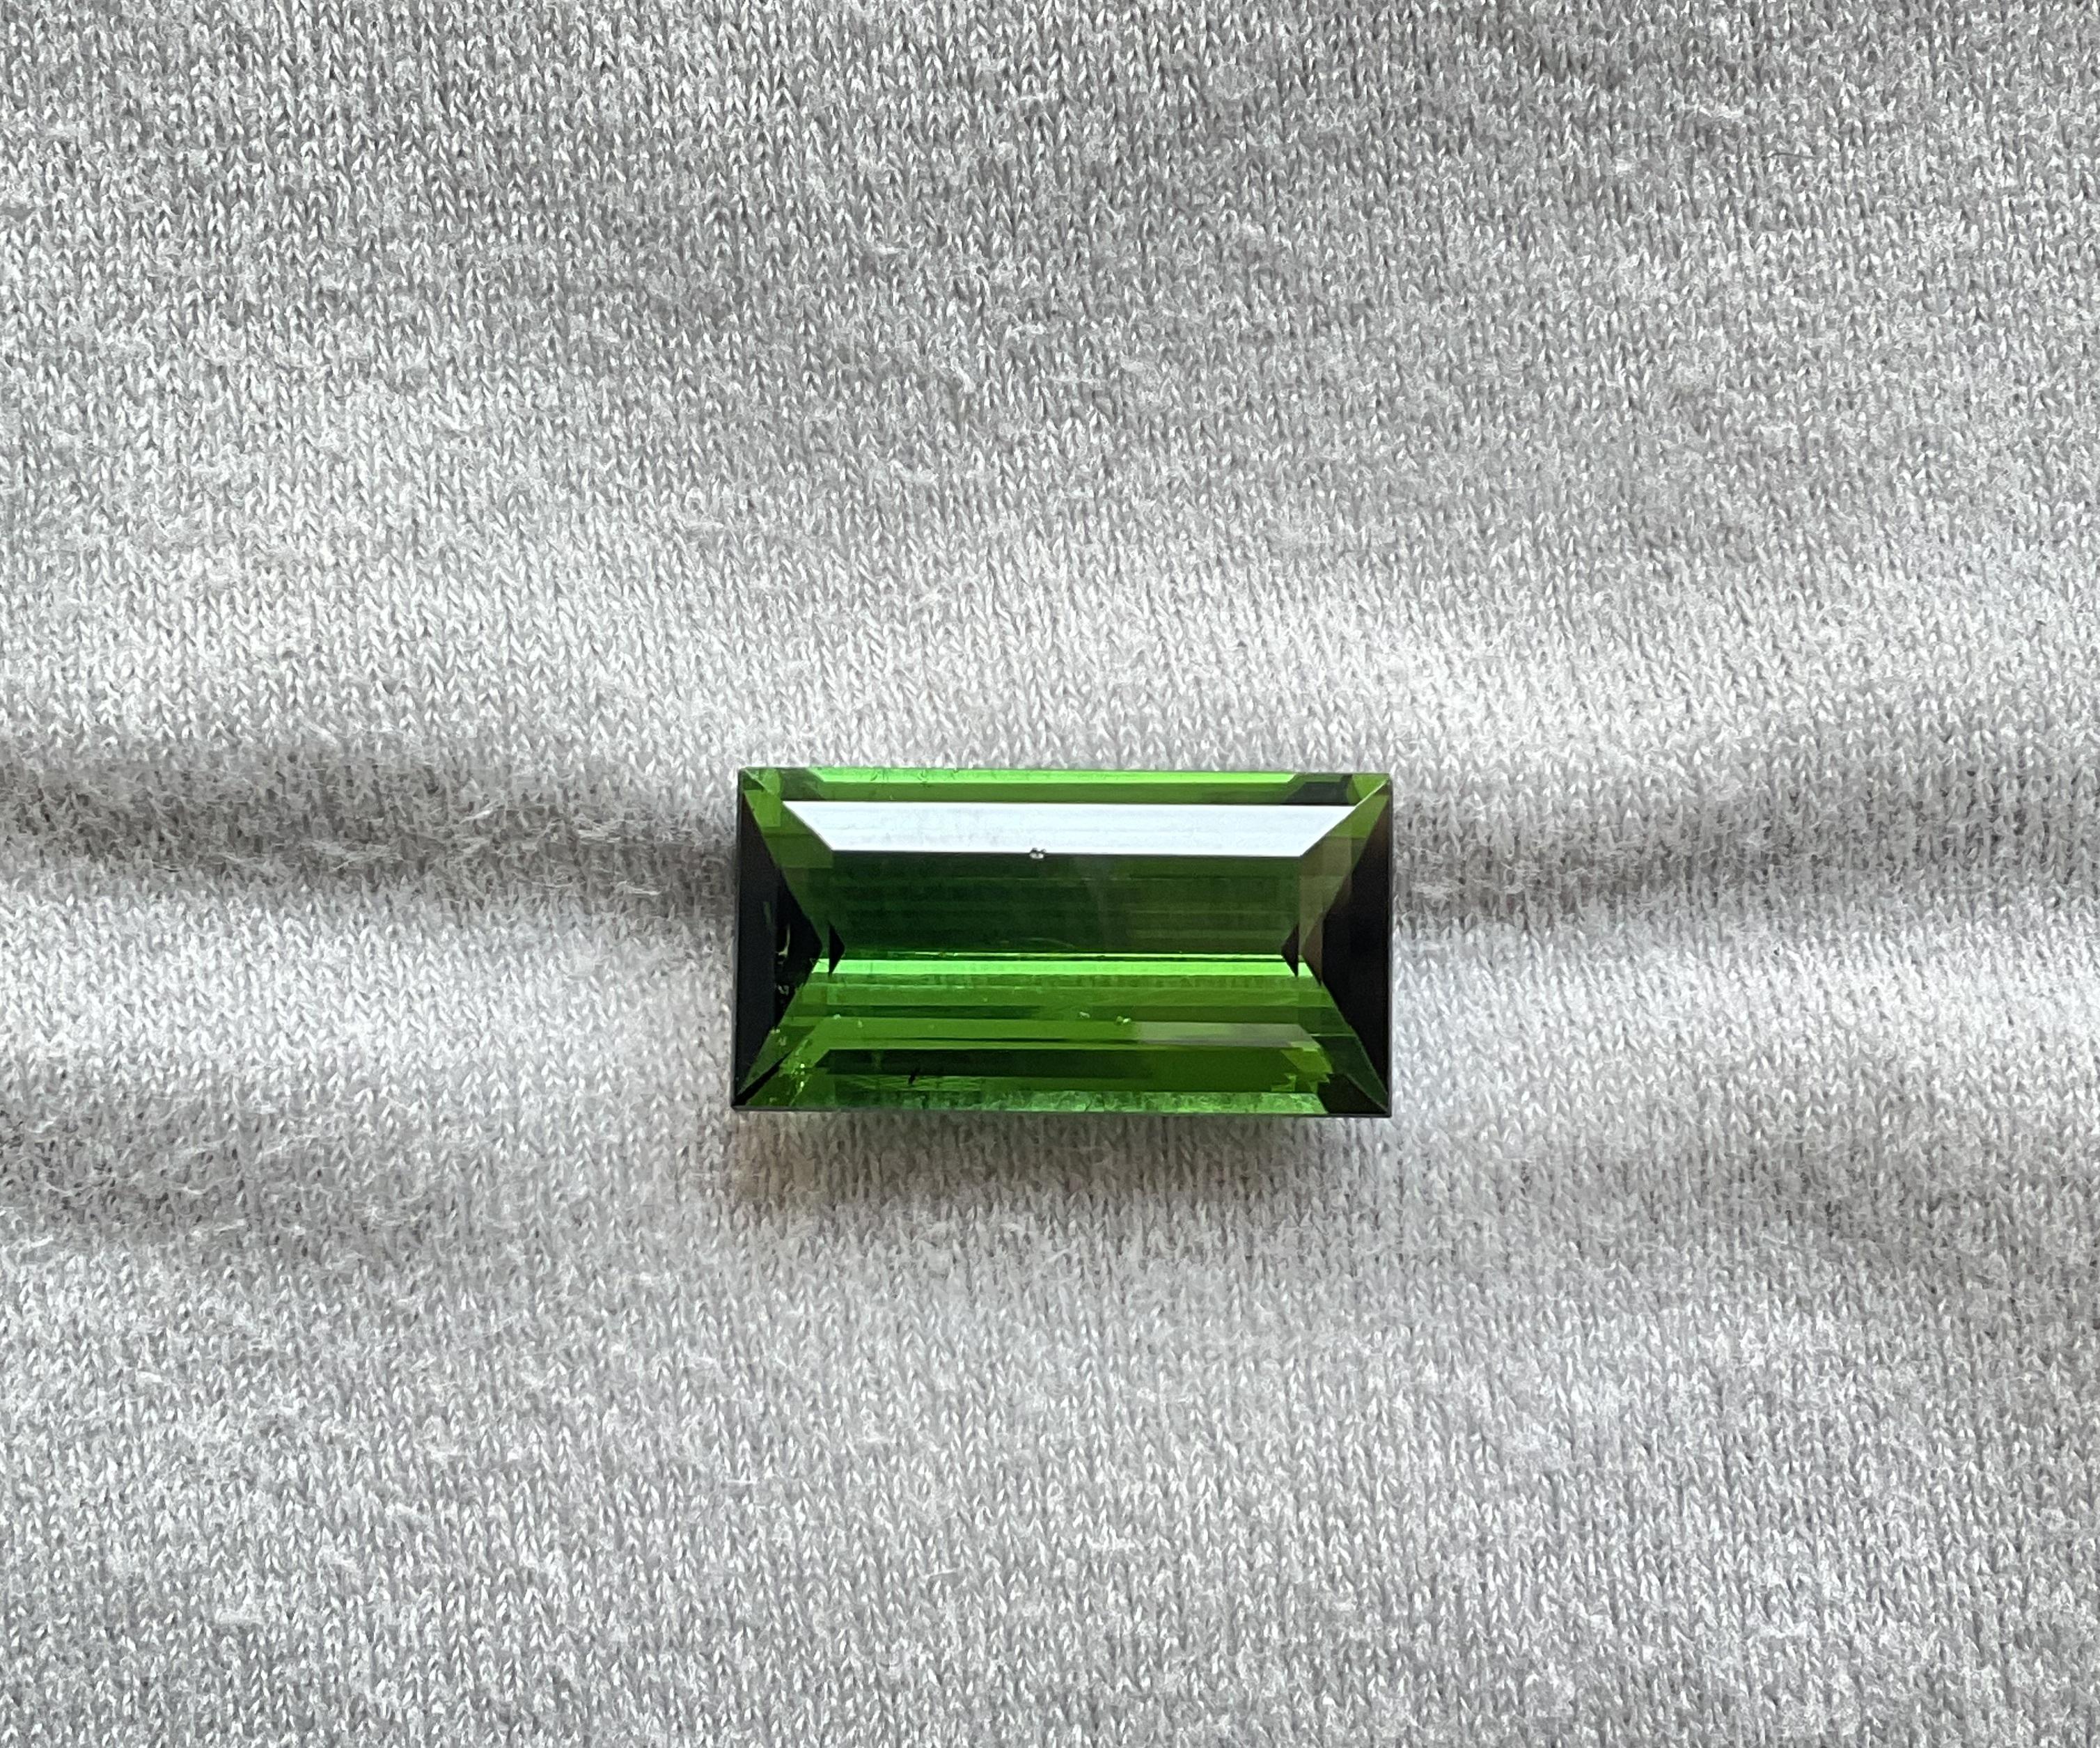 11.47 carats nigeria green tourmaline Top Quality baguette Cut stone natural Gem In New Condition For Sale In Jaipur, RJ